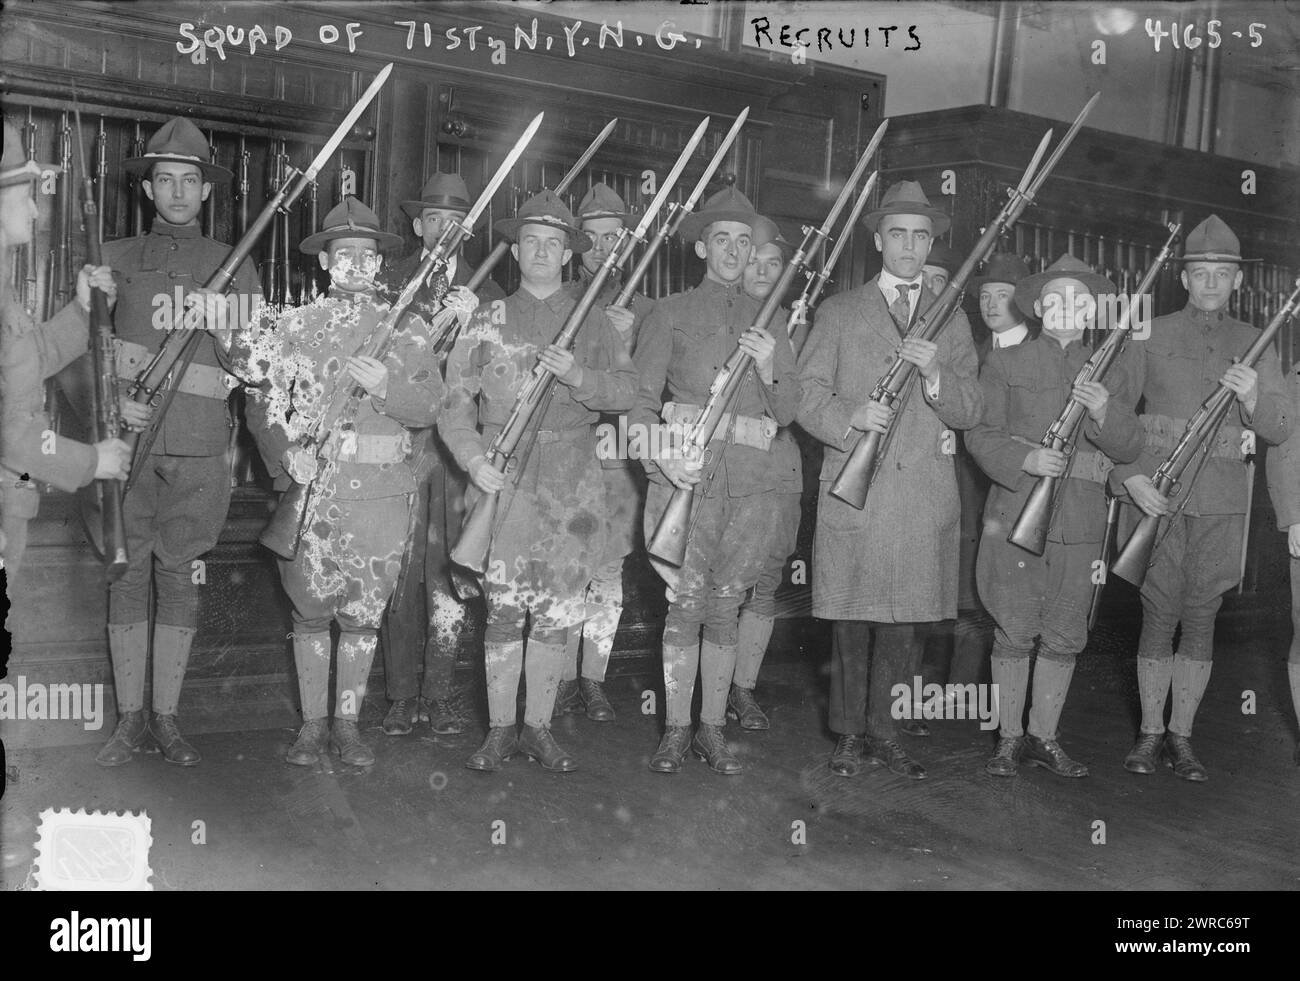 Squad of 71st N.Y.N.G. recruits, Photograph shows the 71st Regiment of the New York National Guard mustered into Federal Field Service on March 28, 1917., 1917 March 26, Glass negatives, 1 negative: glass Stock Photo